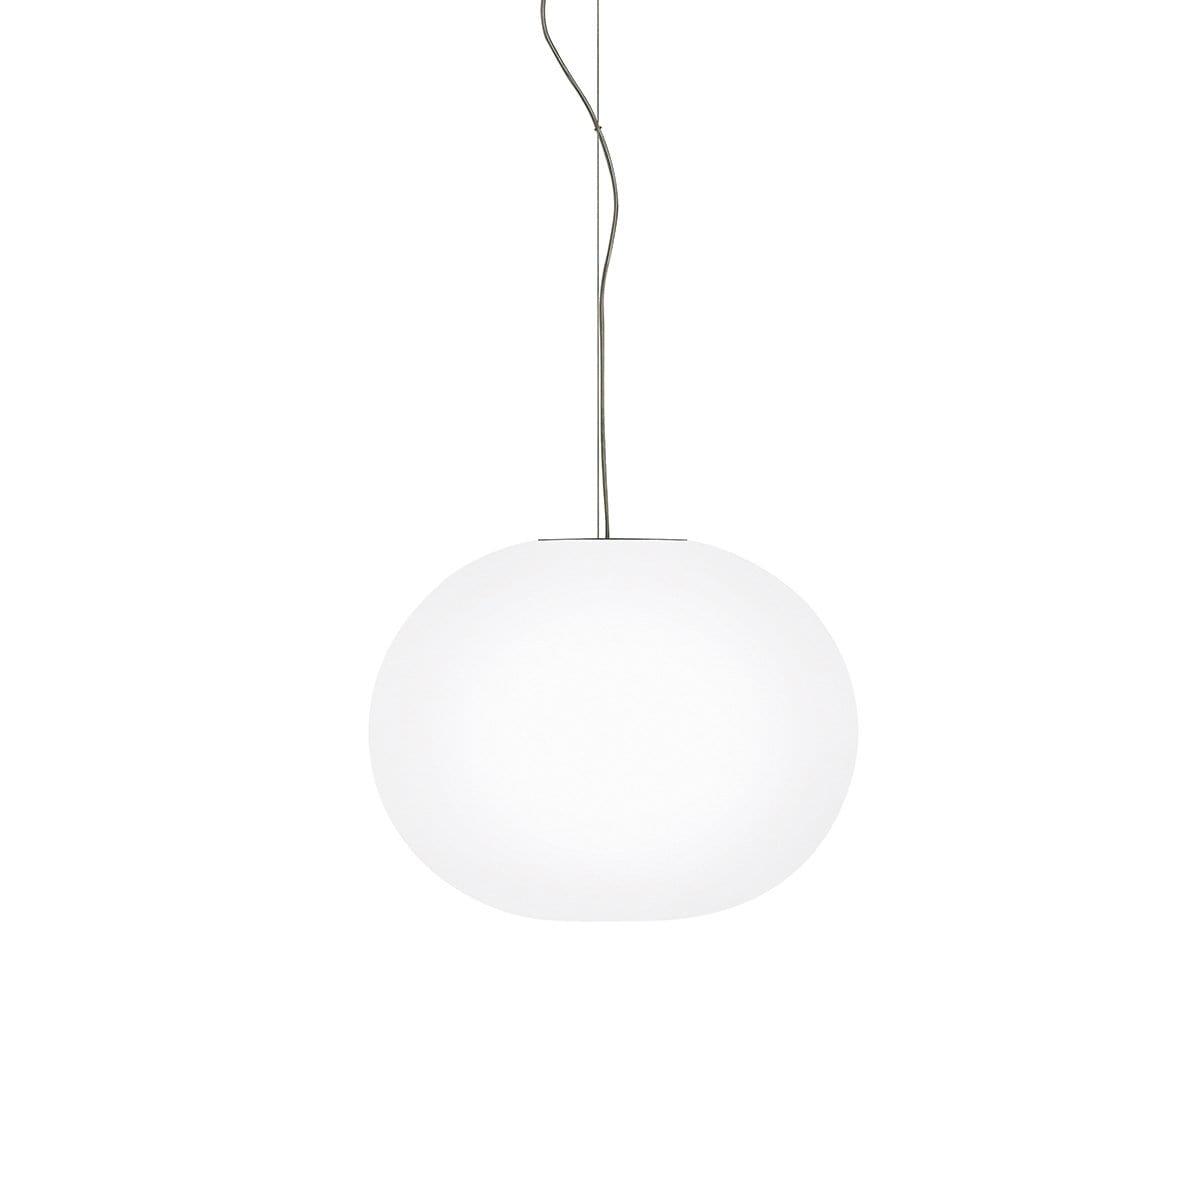 pulsåre Roux Afdeling Glo-Ball S by Flos exclusively through Curated